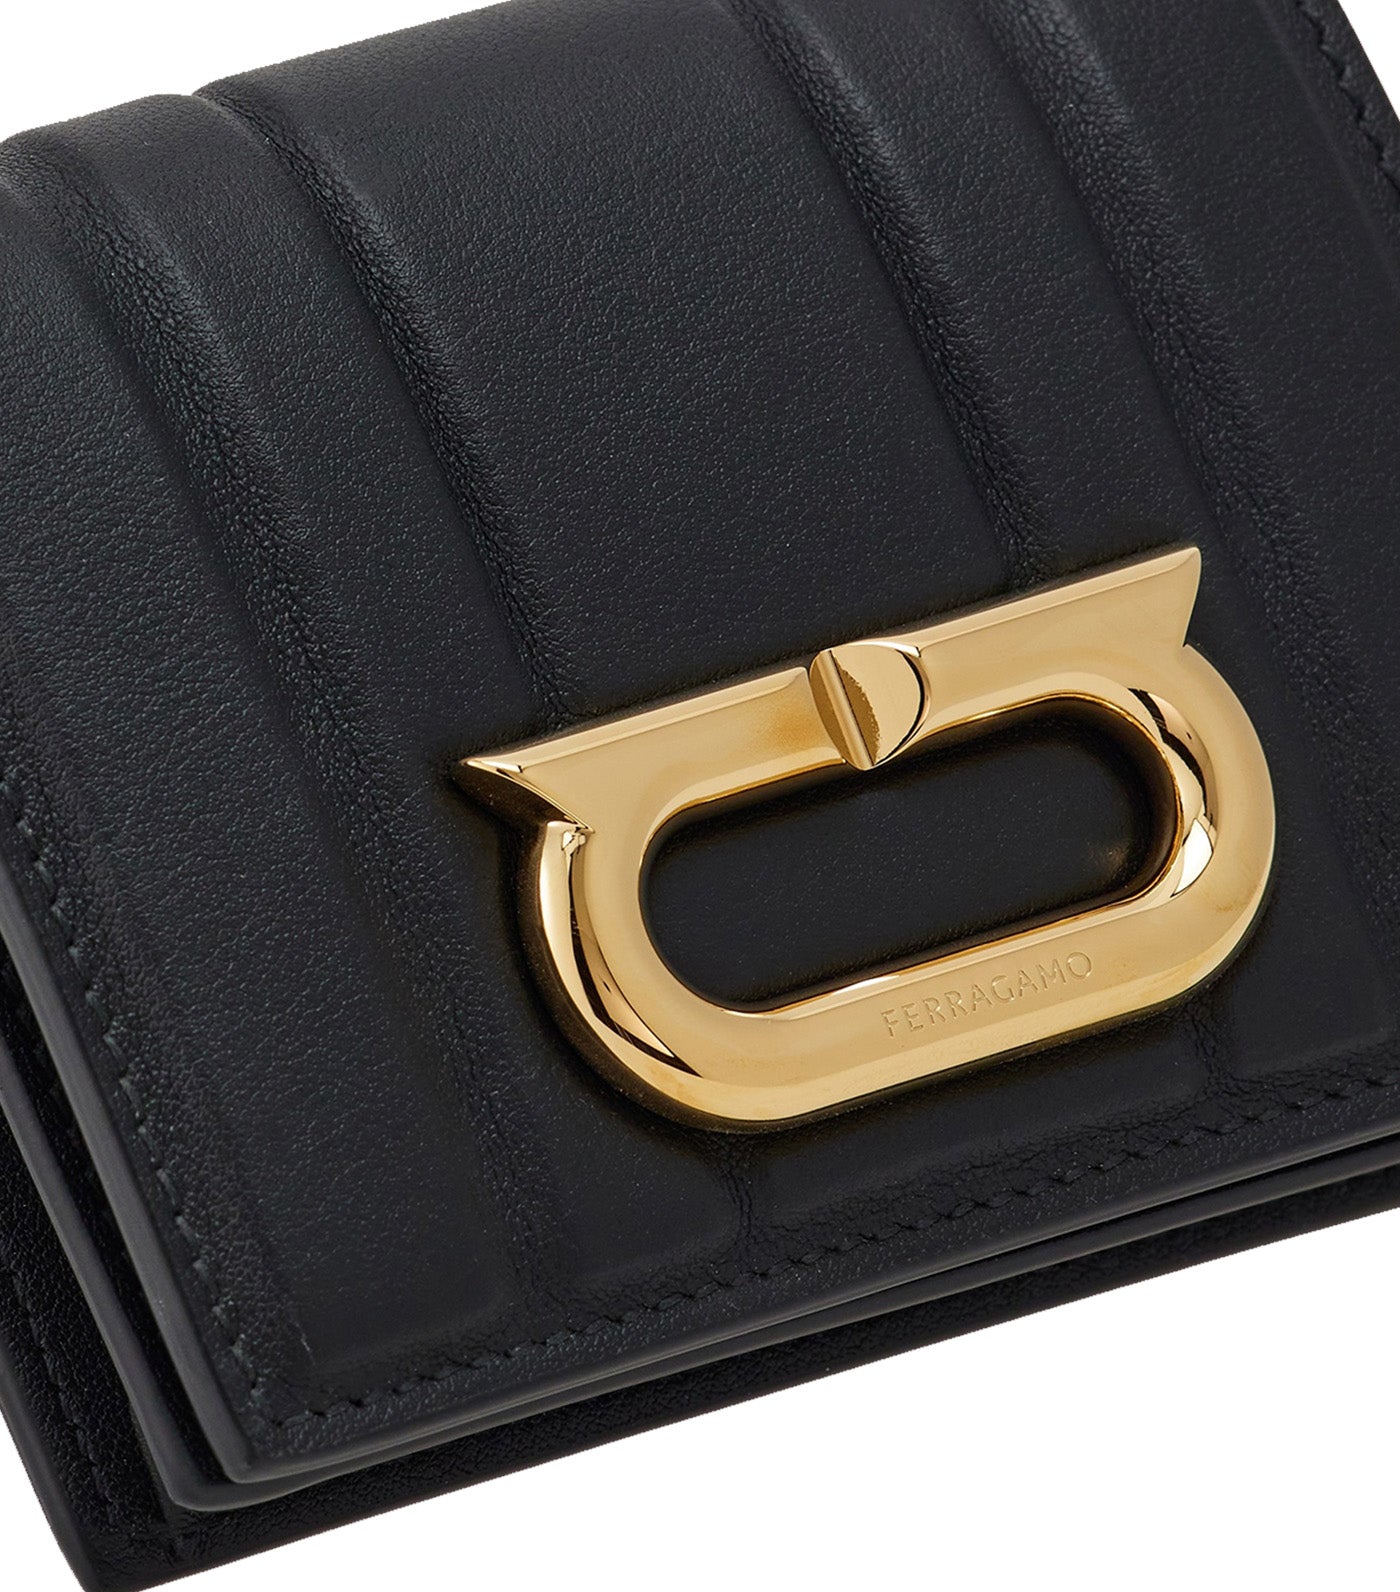 Padded Compact Wallet Black